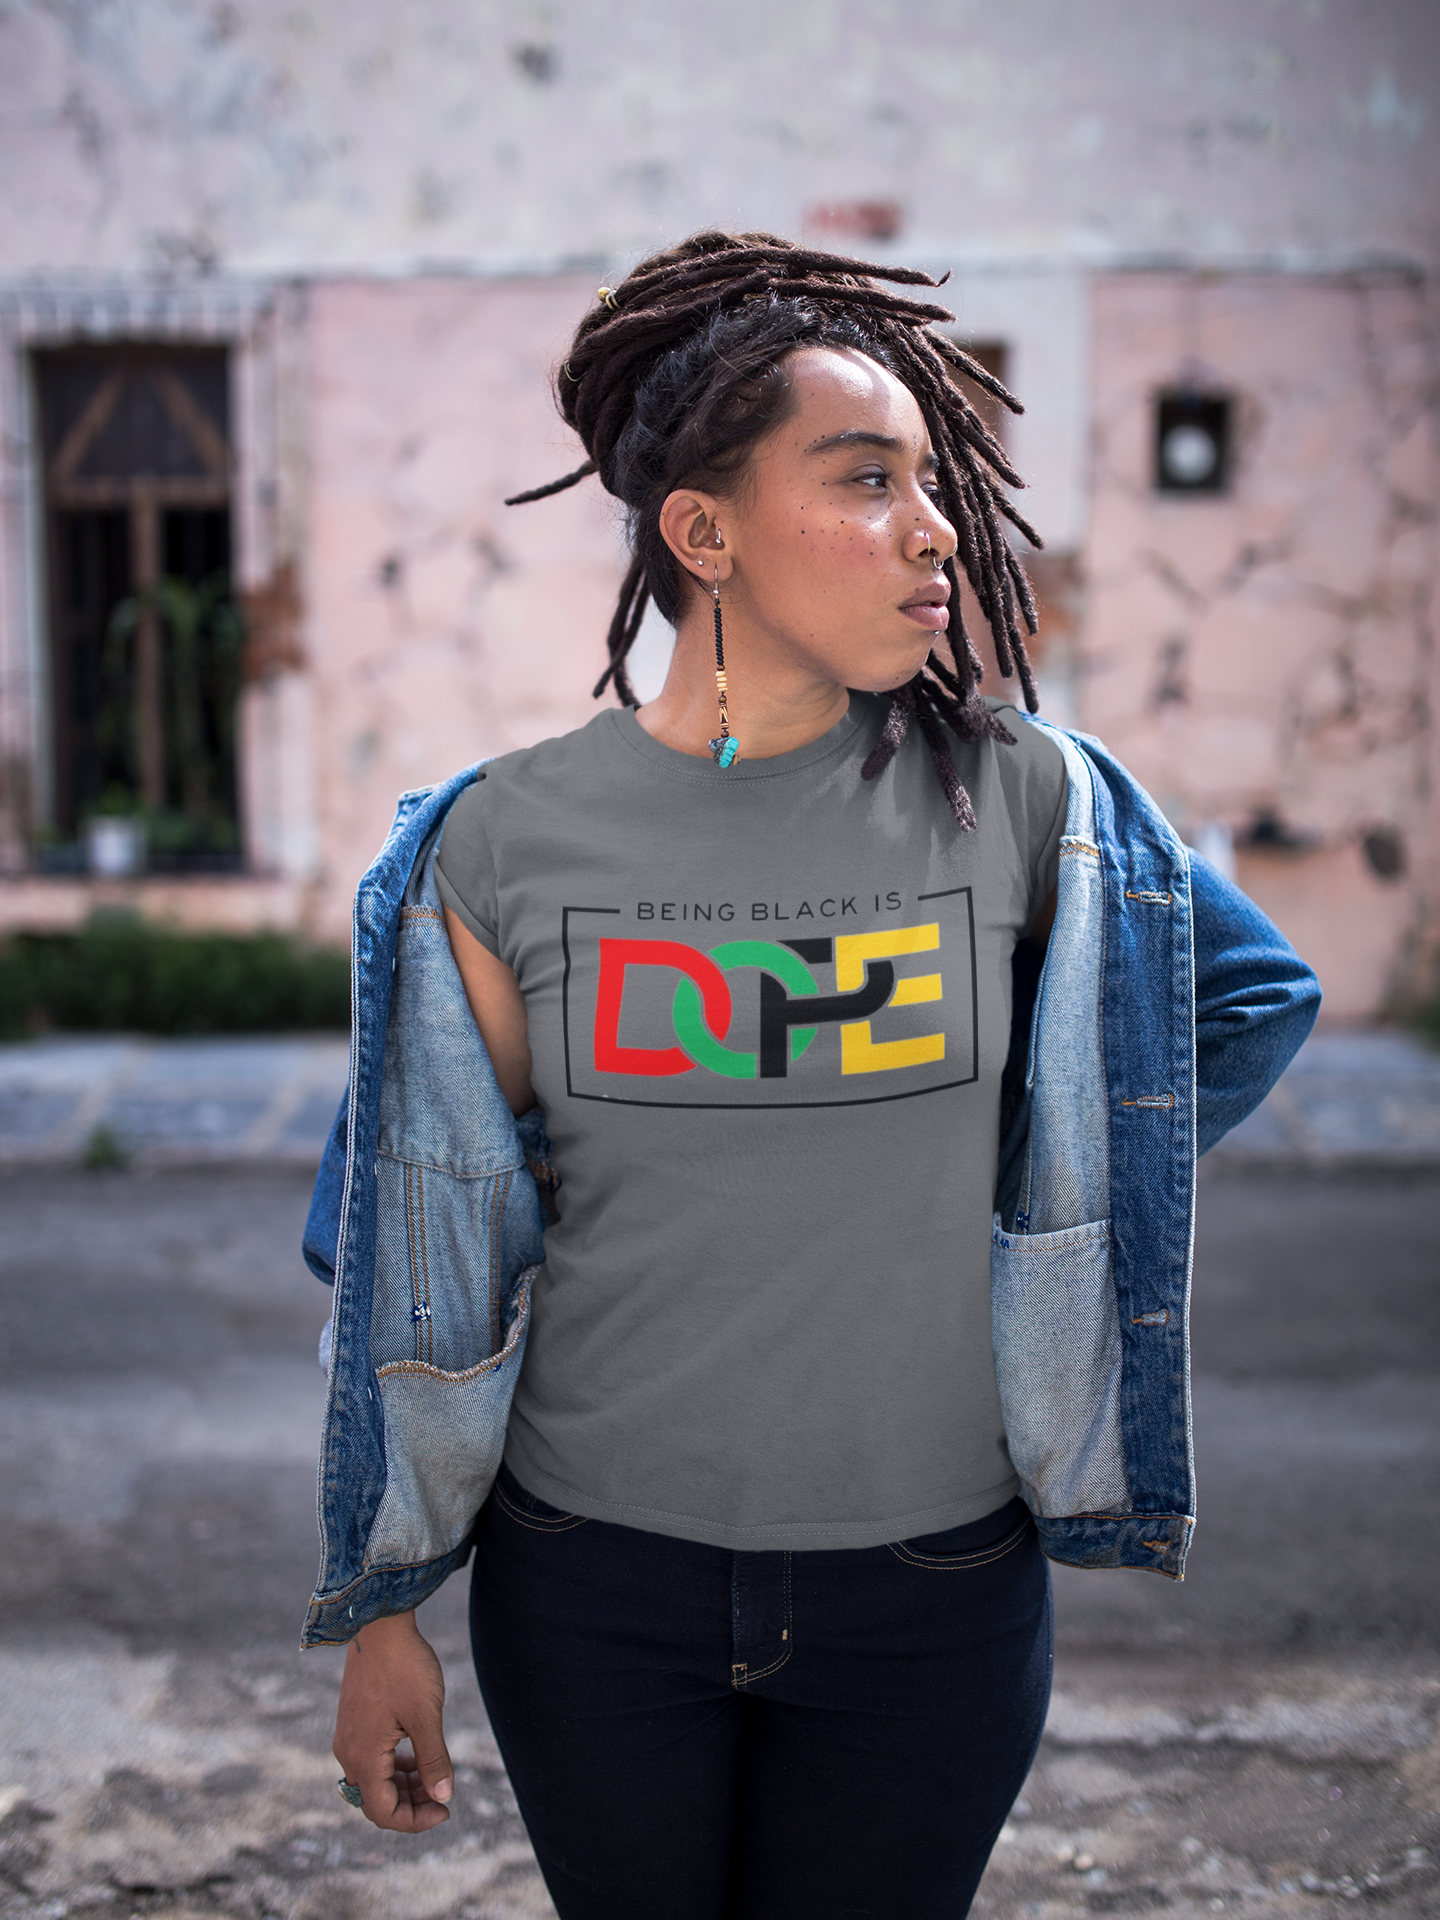 Black Girl with grey T shirt text "Being Black is Dope"